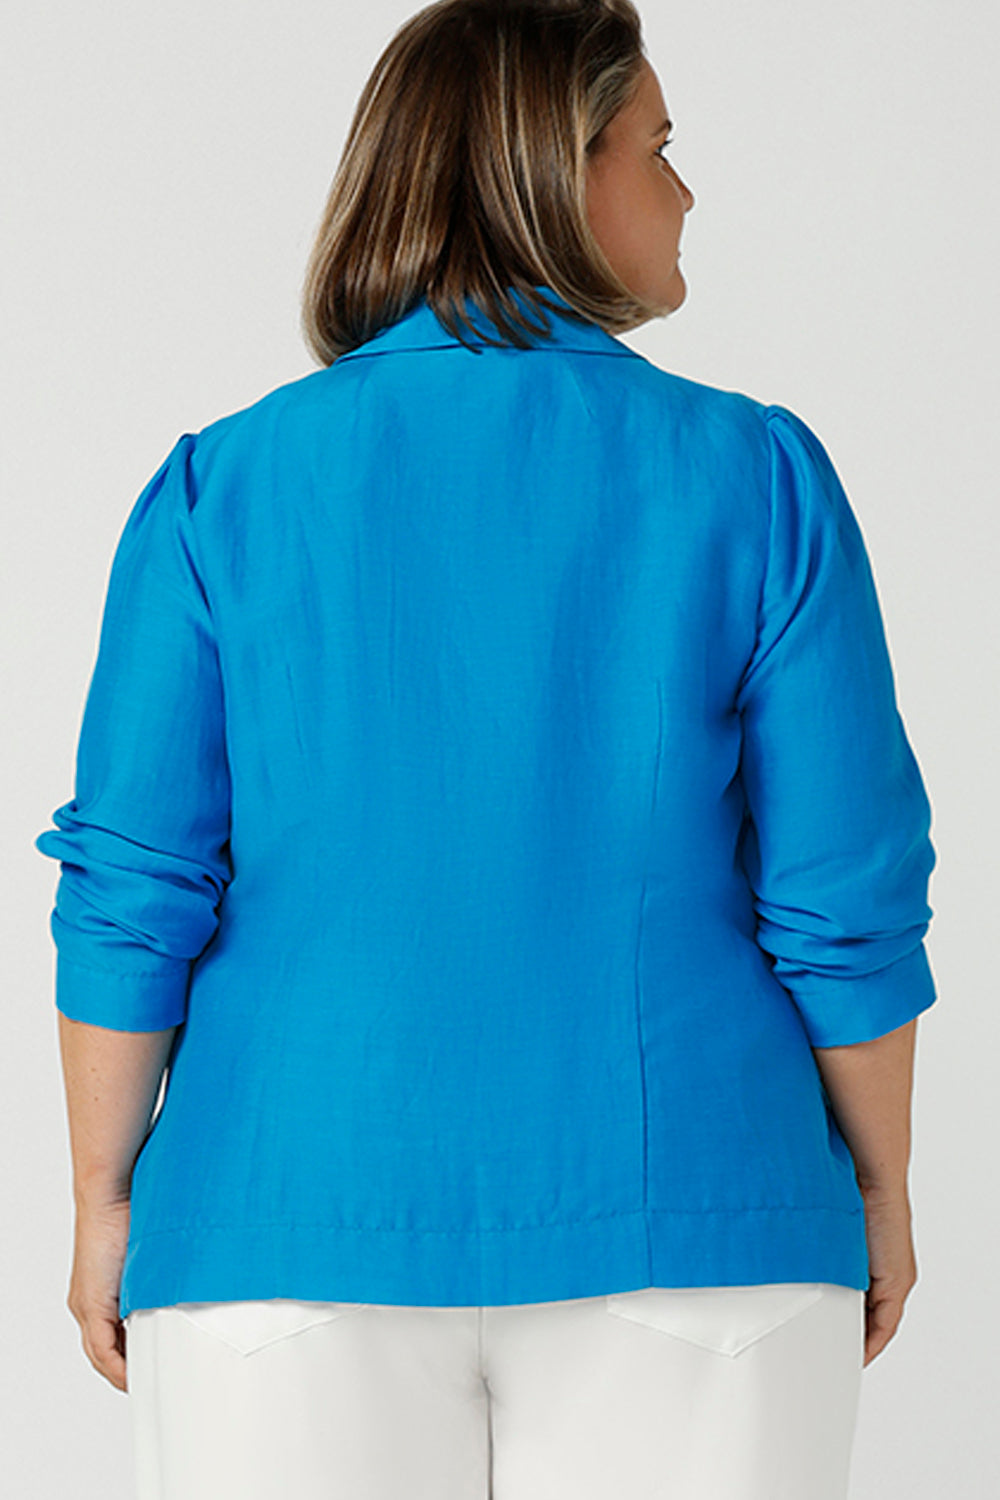 Back view of A curvy size, size 16 woman wearing a longline blazer in opal blue tencel fabric with a white bamboo cami. This lightweight jacket is comfortable for your everyday workwear, casual and travel capsule wardrobe. Shop this Australian-made blazer online in sizes 8 to 24, petite to plus sizes.